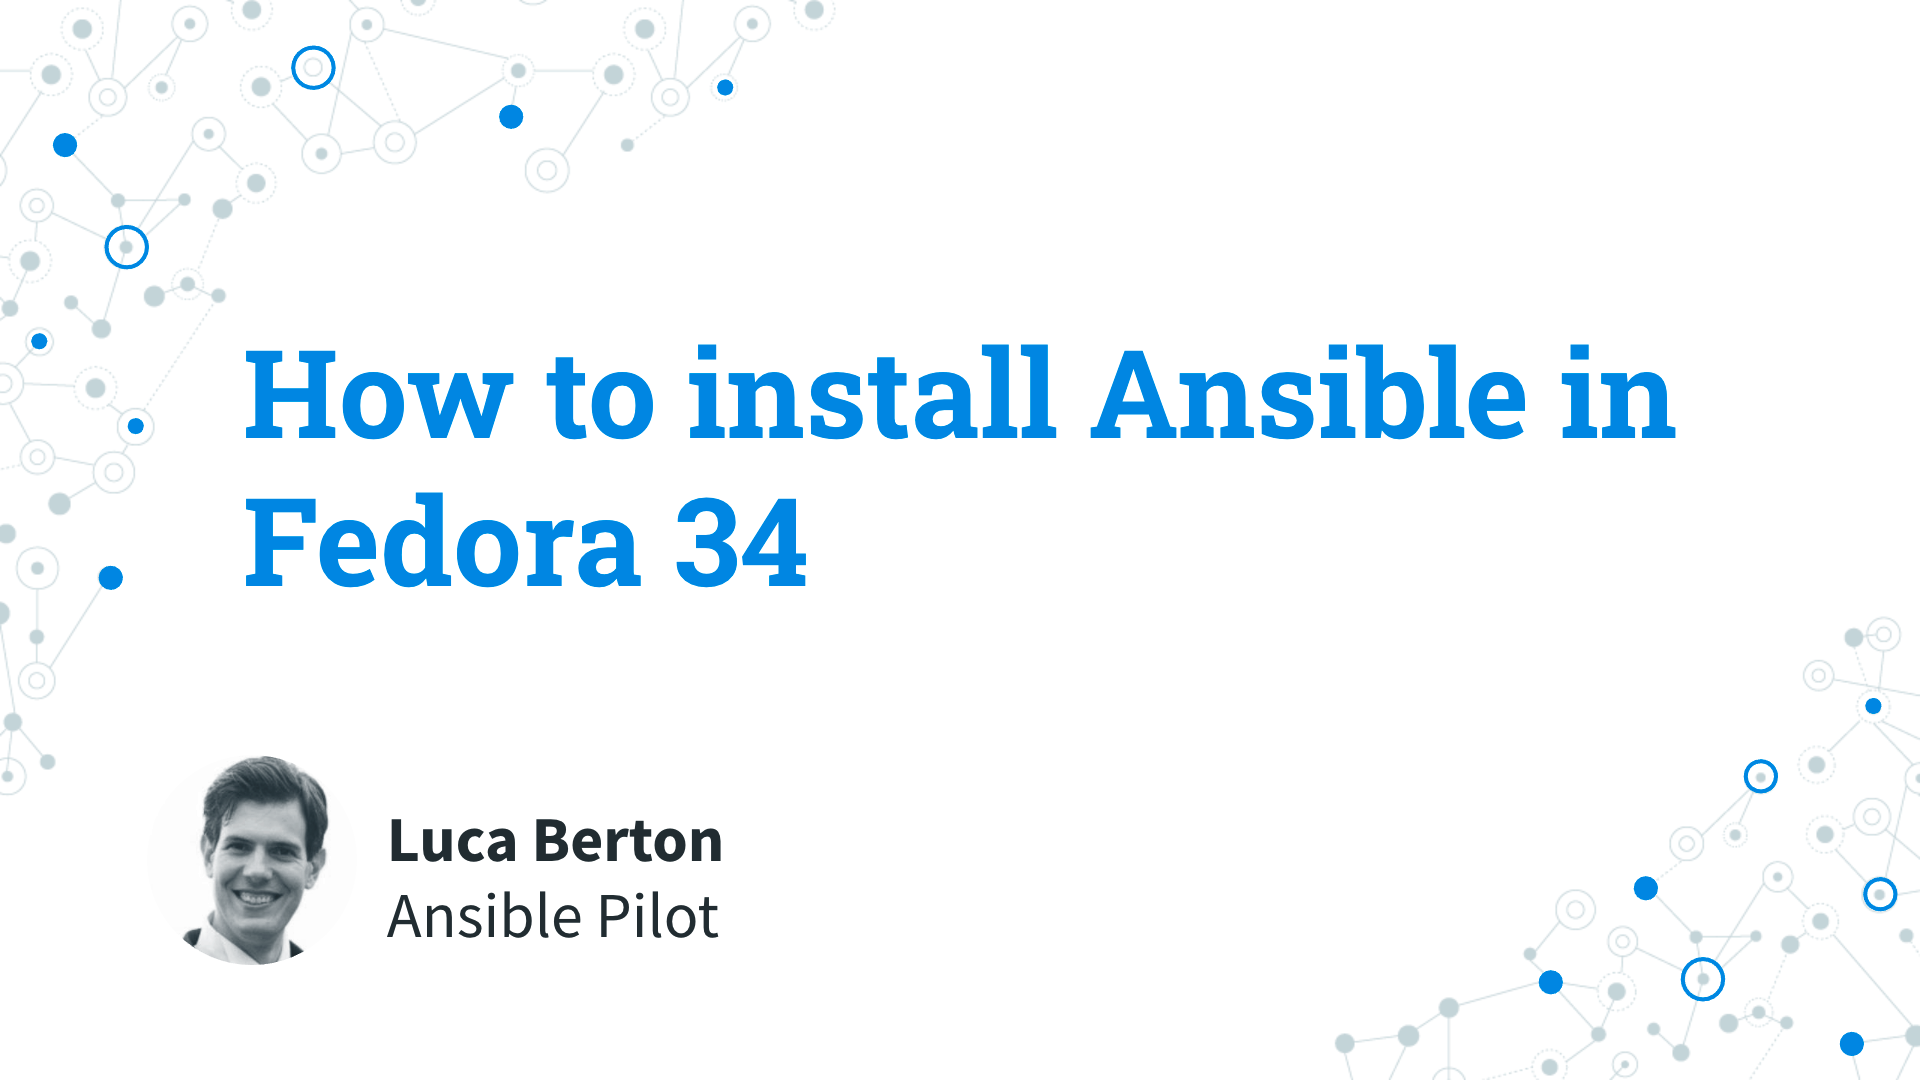 How to install Ansible in Fedora 34 - Ansible install